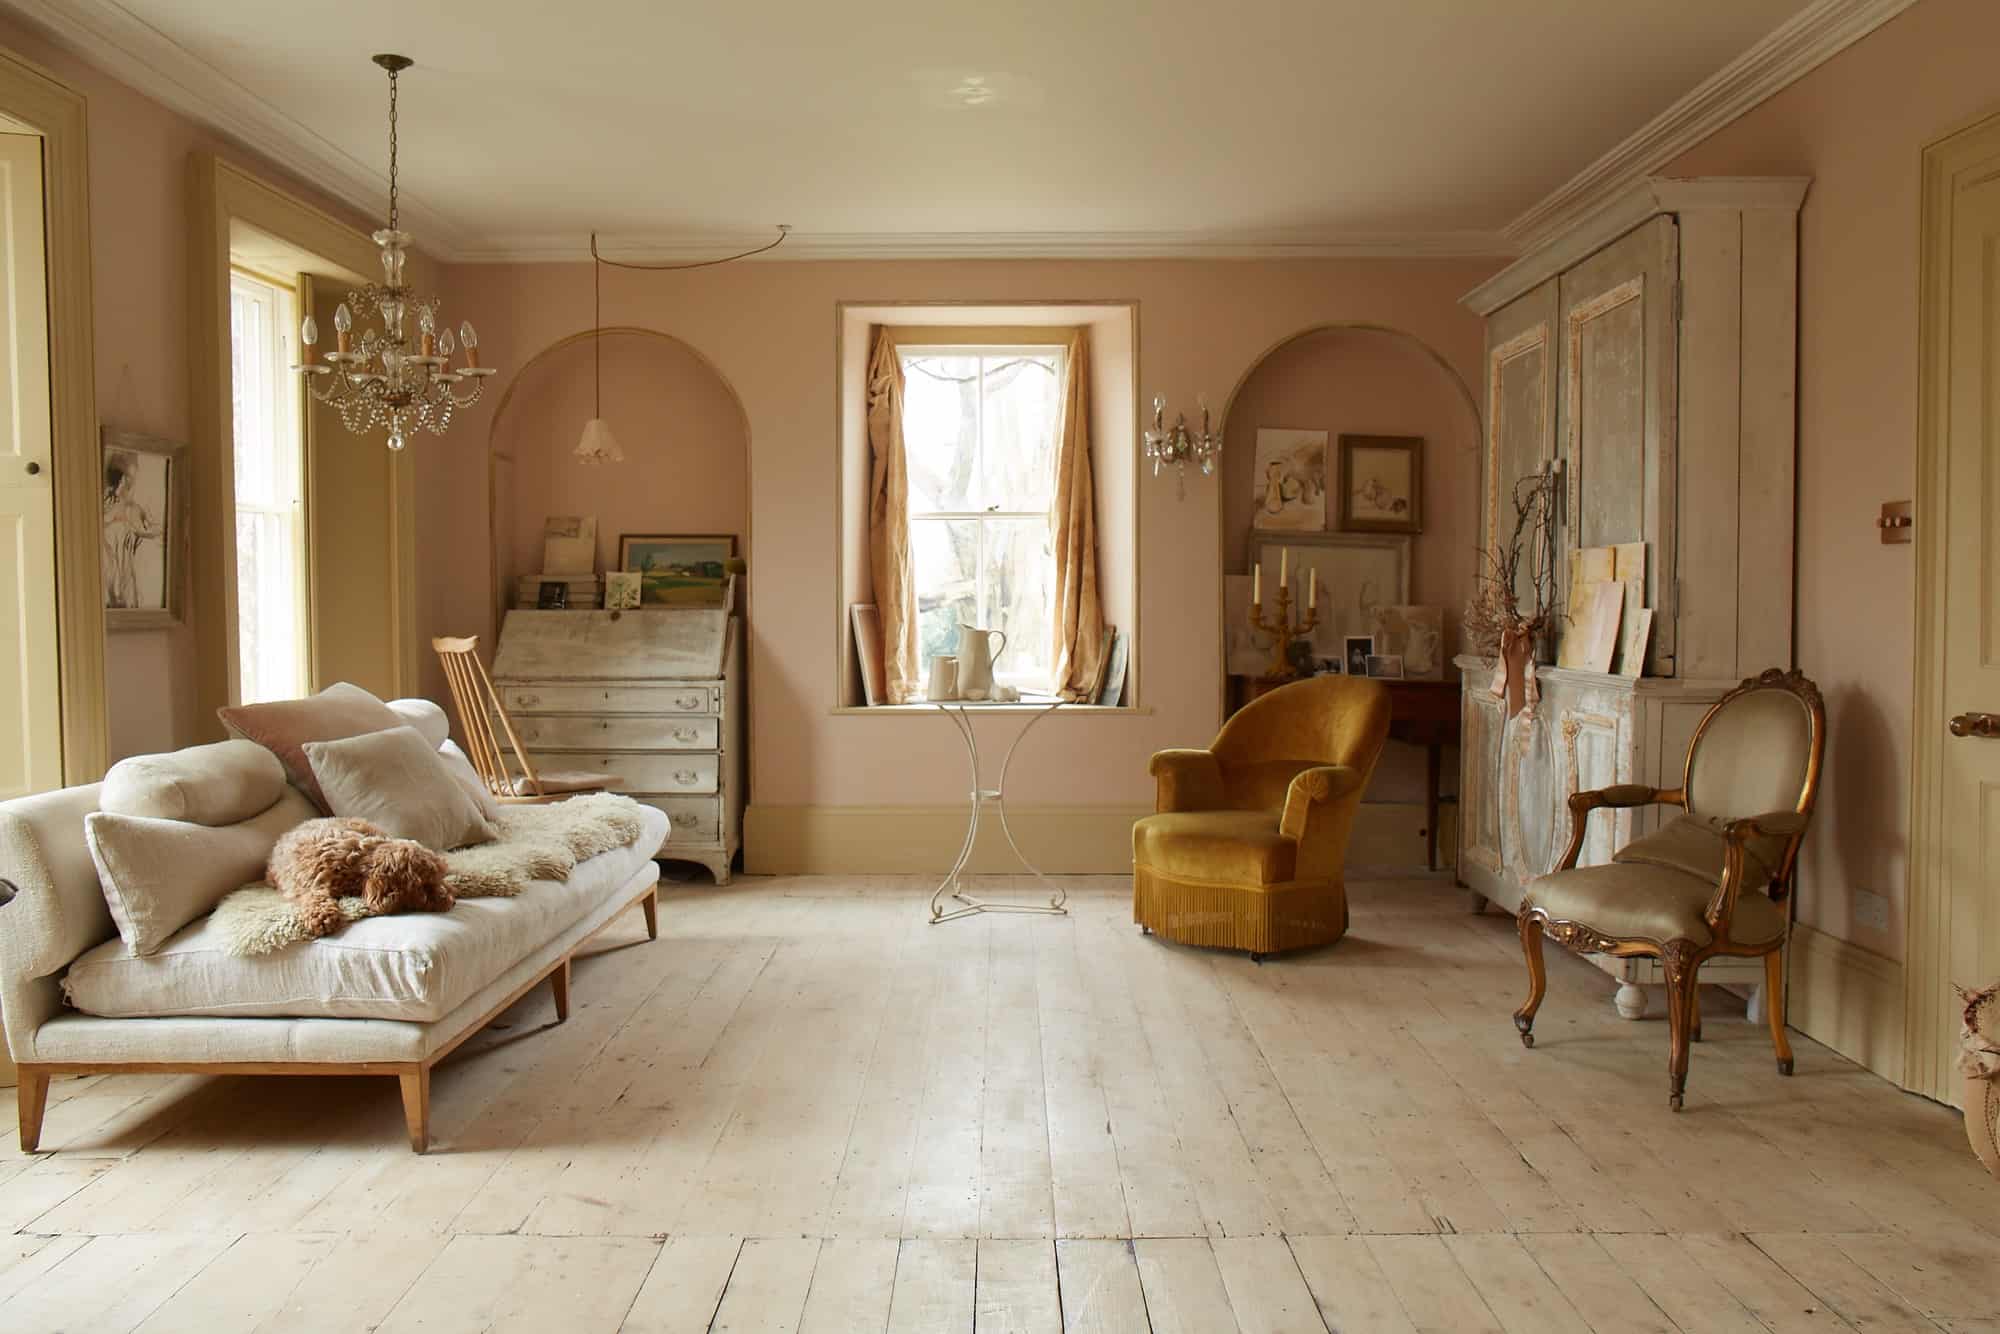 Chalford House GL6 - A beautiful Georgian home with paired back interiors in a french farmhouse style - The Location Guys